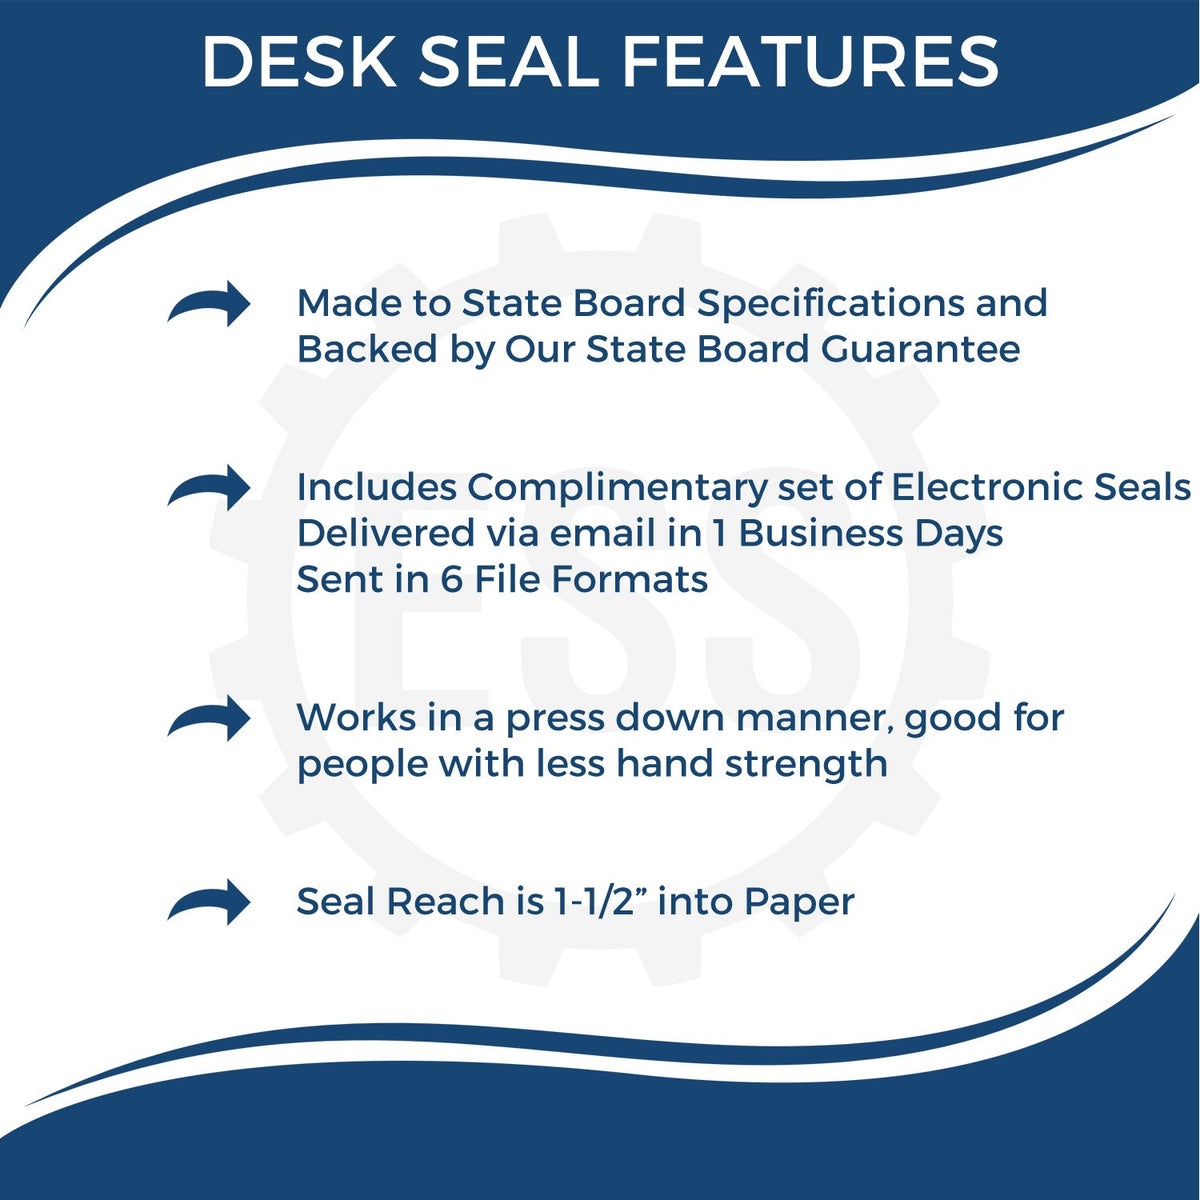 A picture of an infographic highlighting the selling points for the Mississippi Geologist Desk Seal